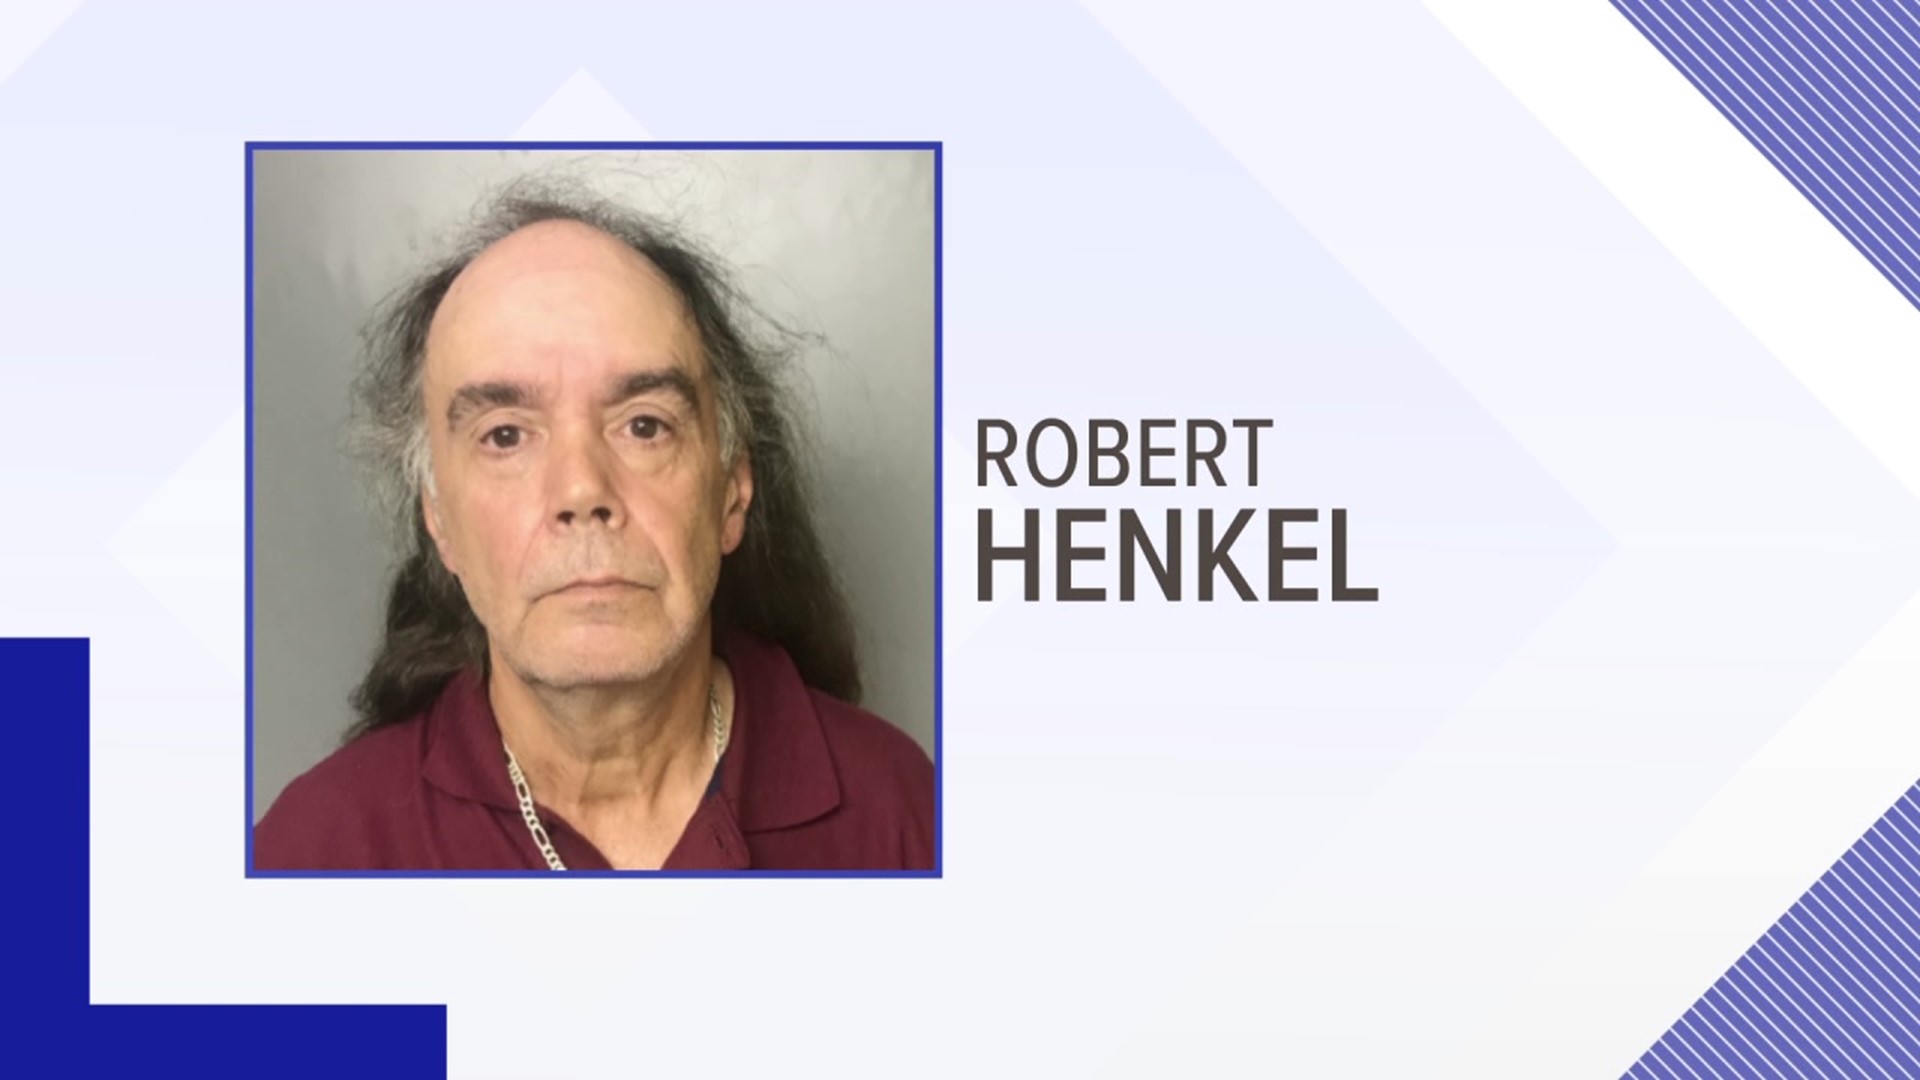 Police in Luzerne County say a man thought he was messaging a 15-year-old boy online, in reality, he was talking to an officer.